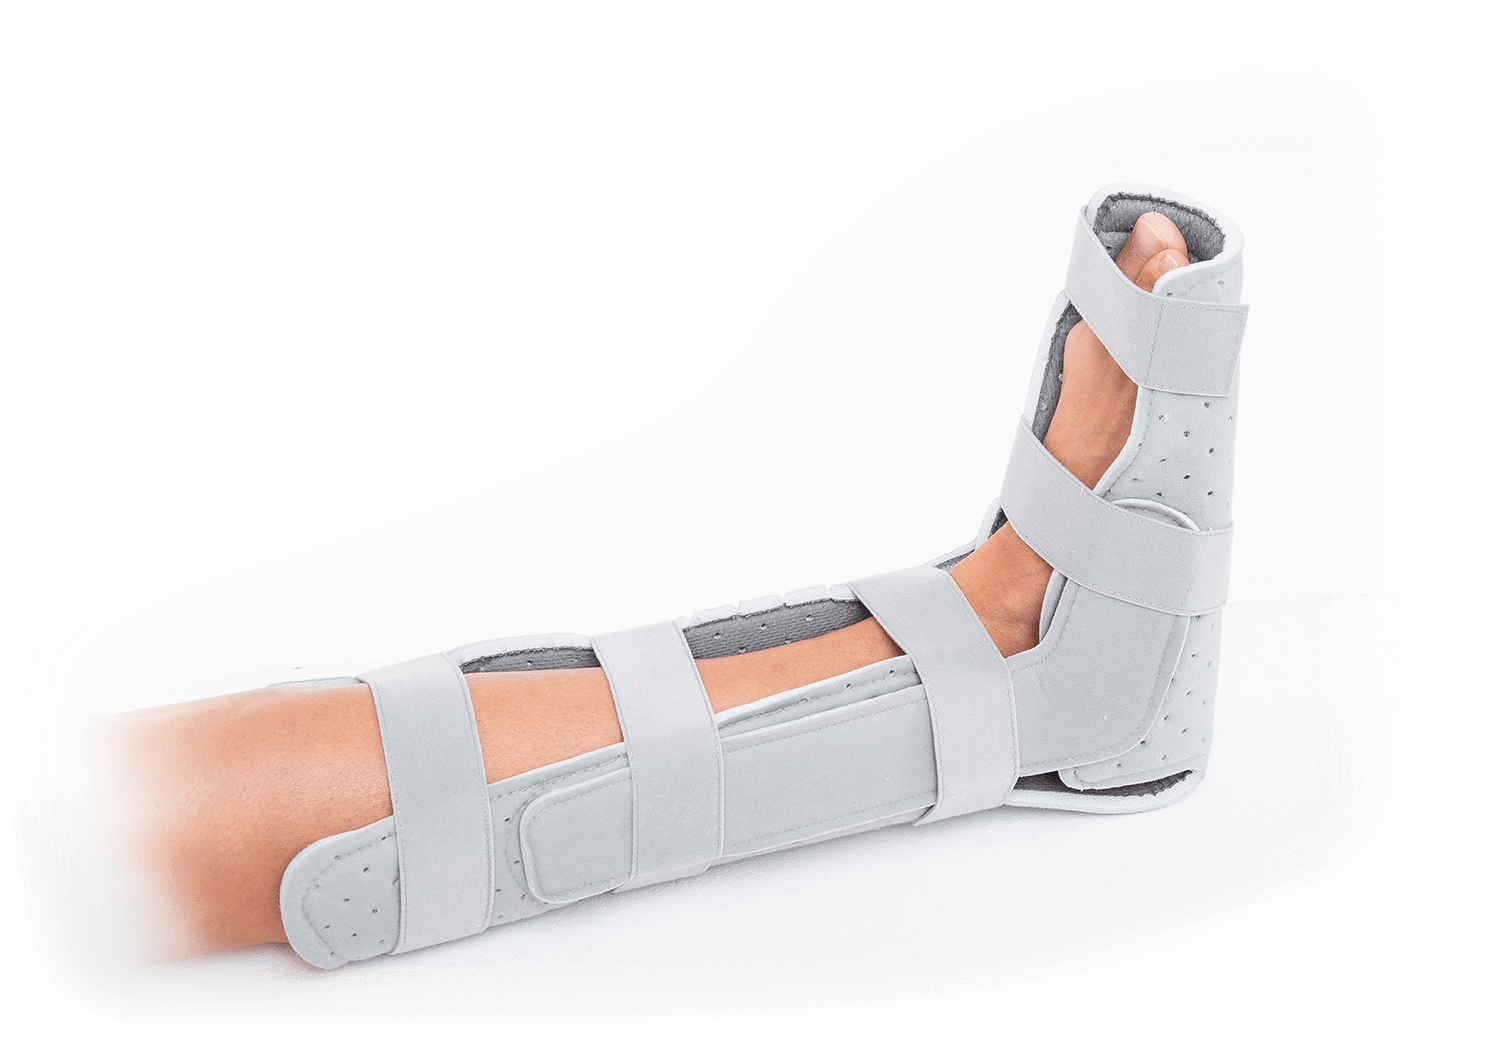 Universal resting shell/orthosis for foot & ankle